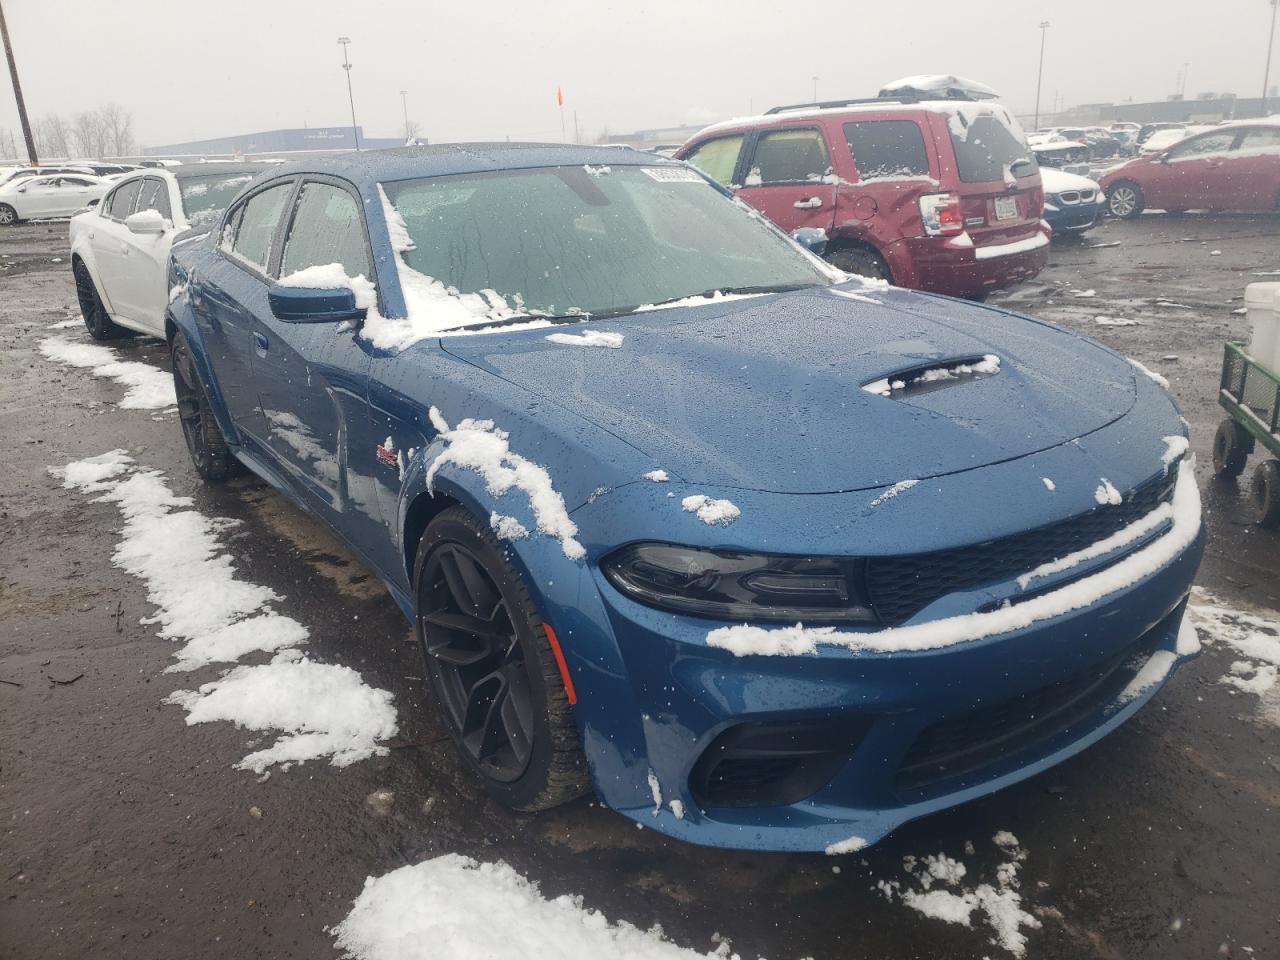 2021 Dodge Charger SC